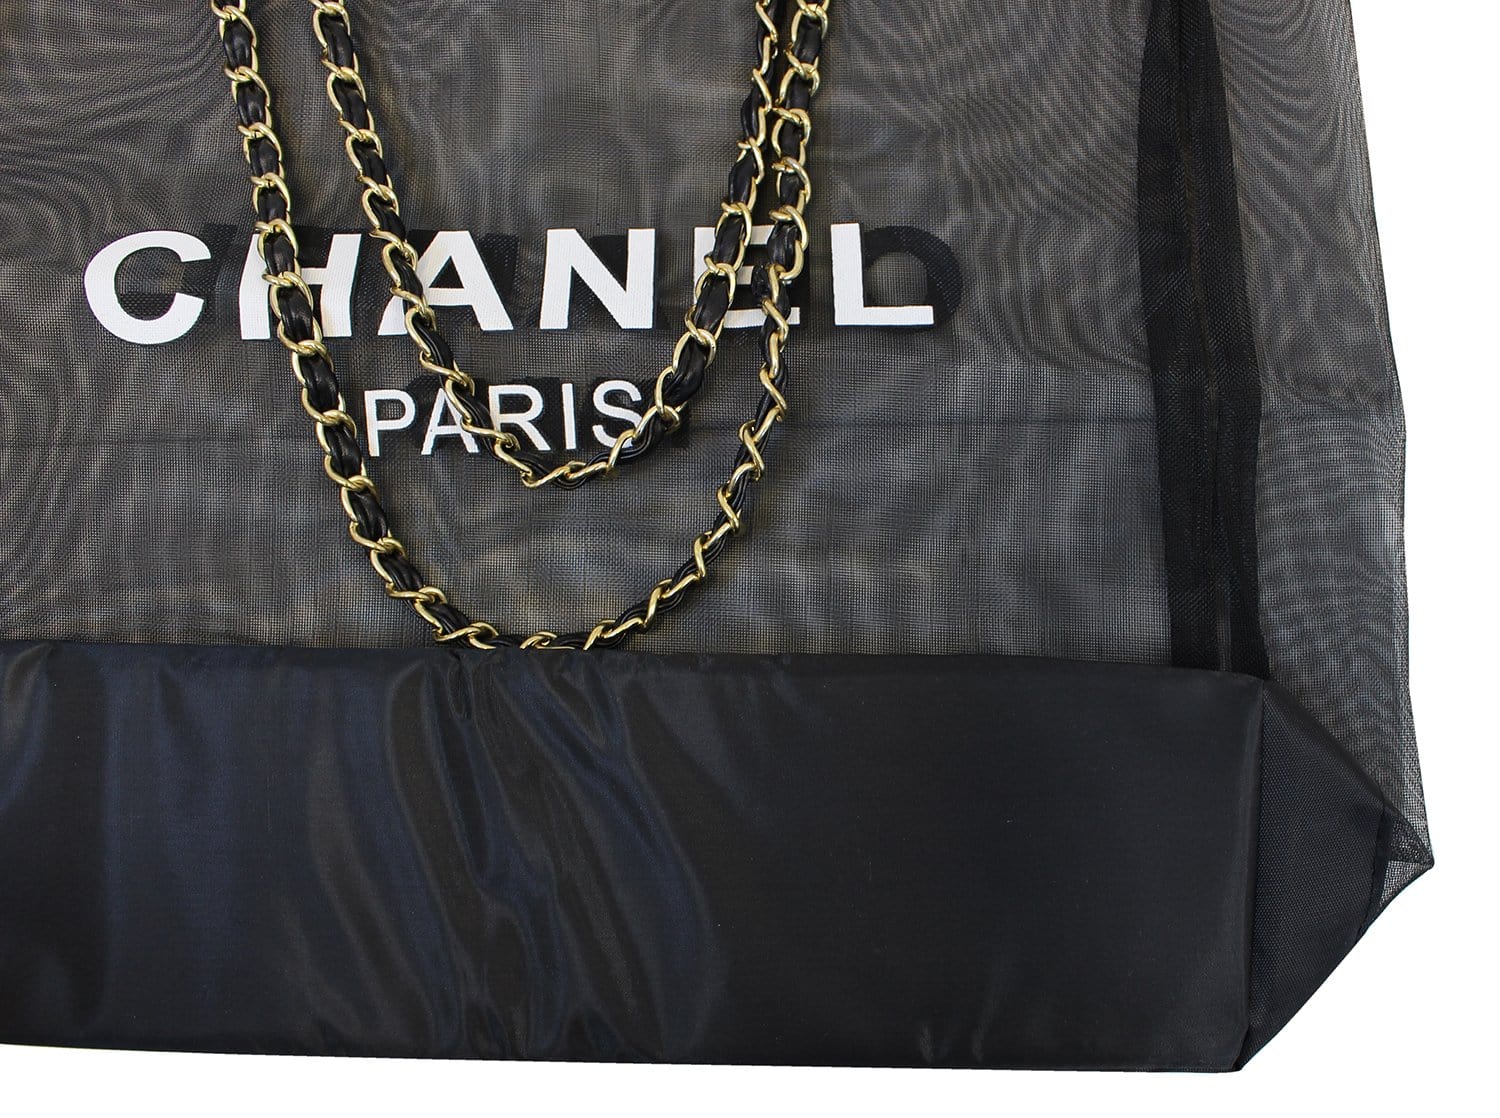 Chanel Mesh Tote Shopping Promotional Gift Bag